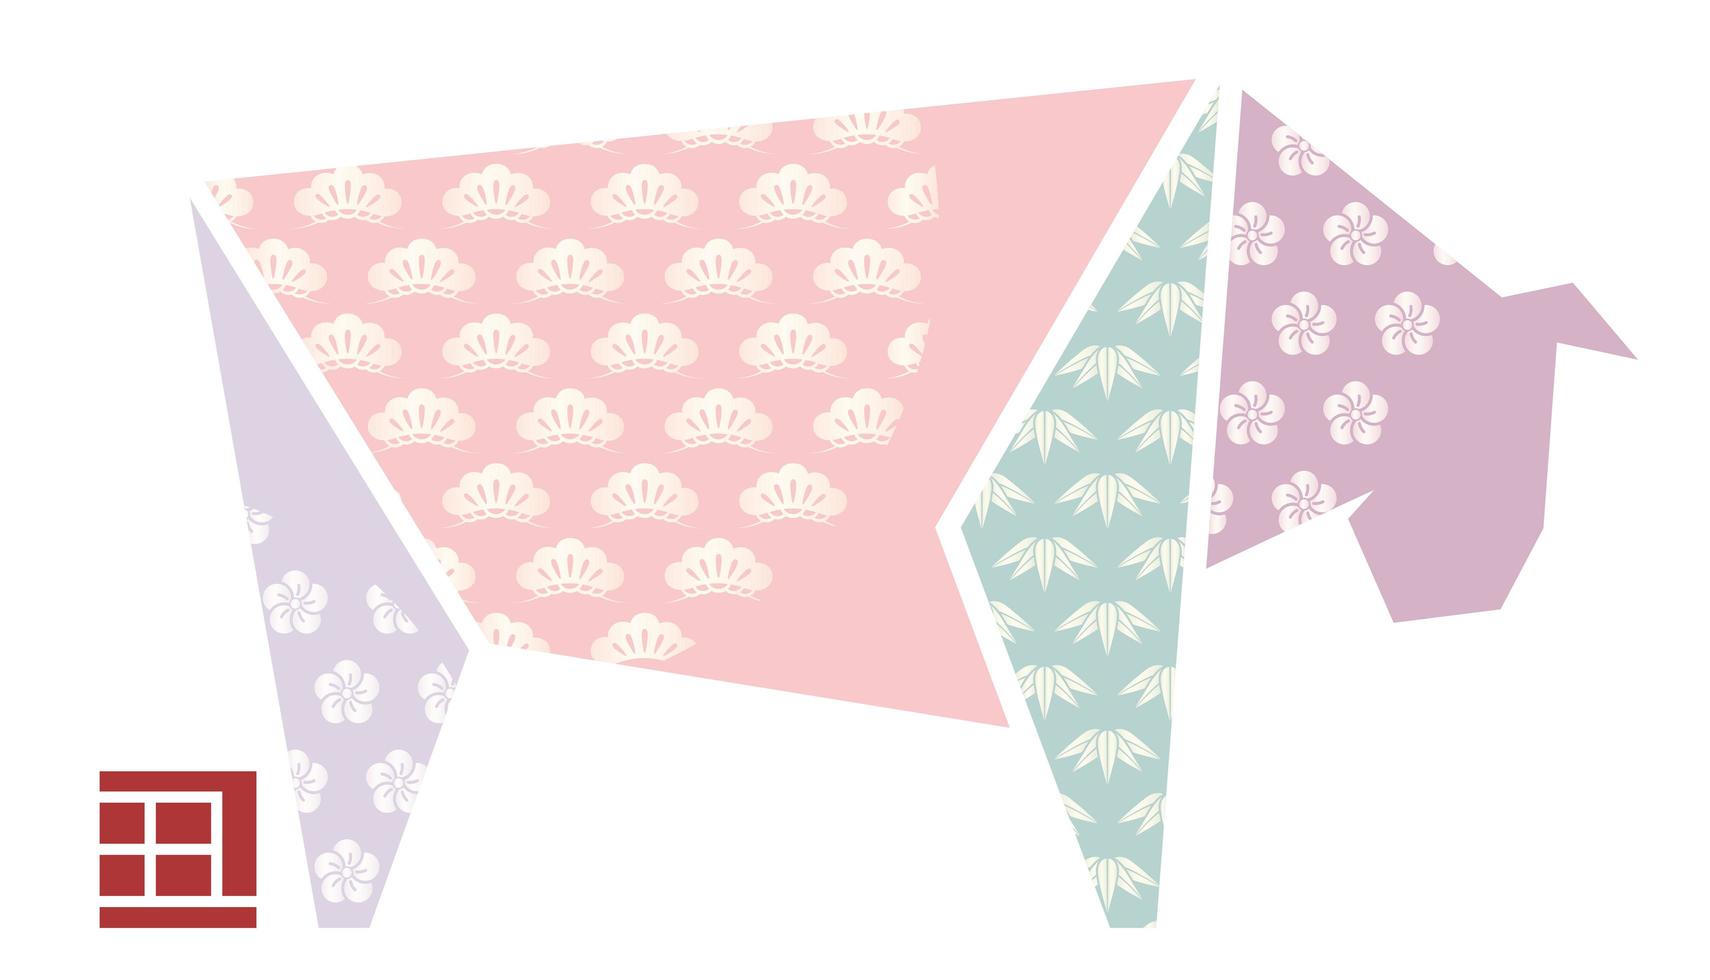 Origami ox with vintage Japanese patterns vector